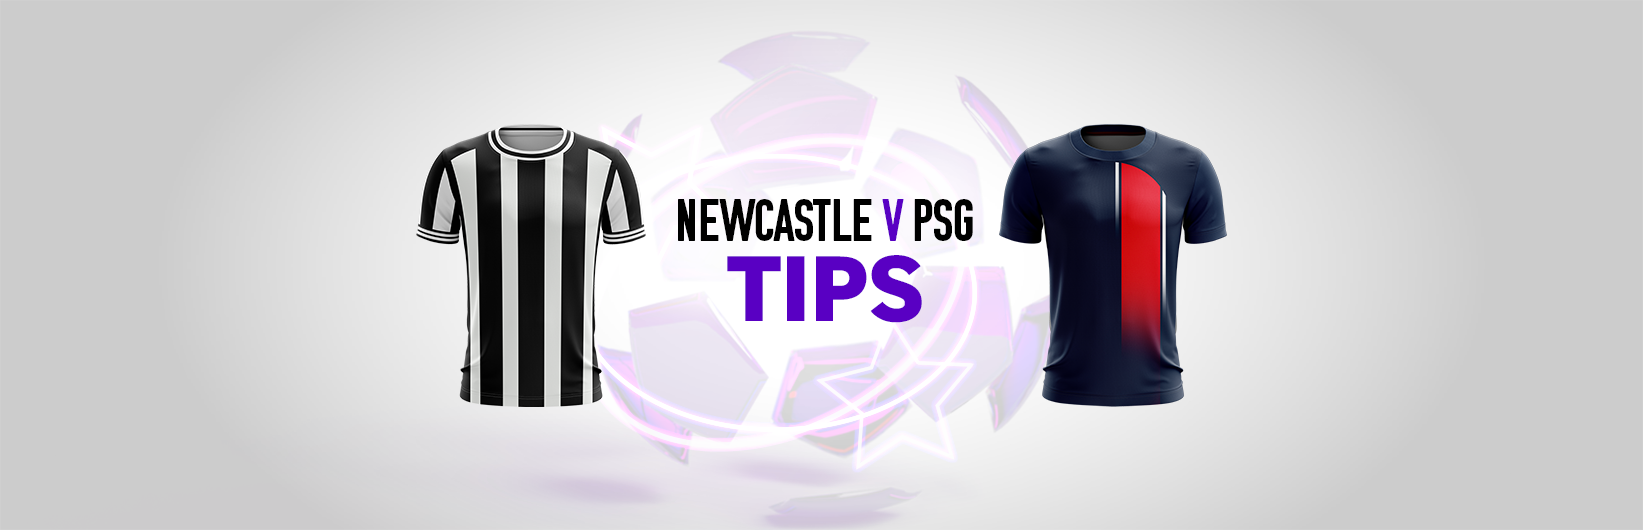 Champions League tips: Best bets for Newcastle v PSG